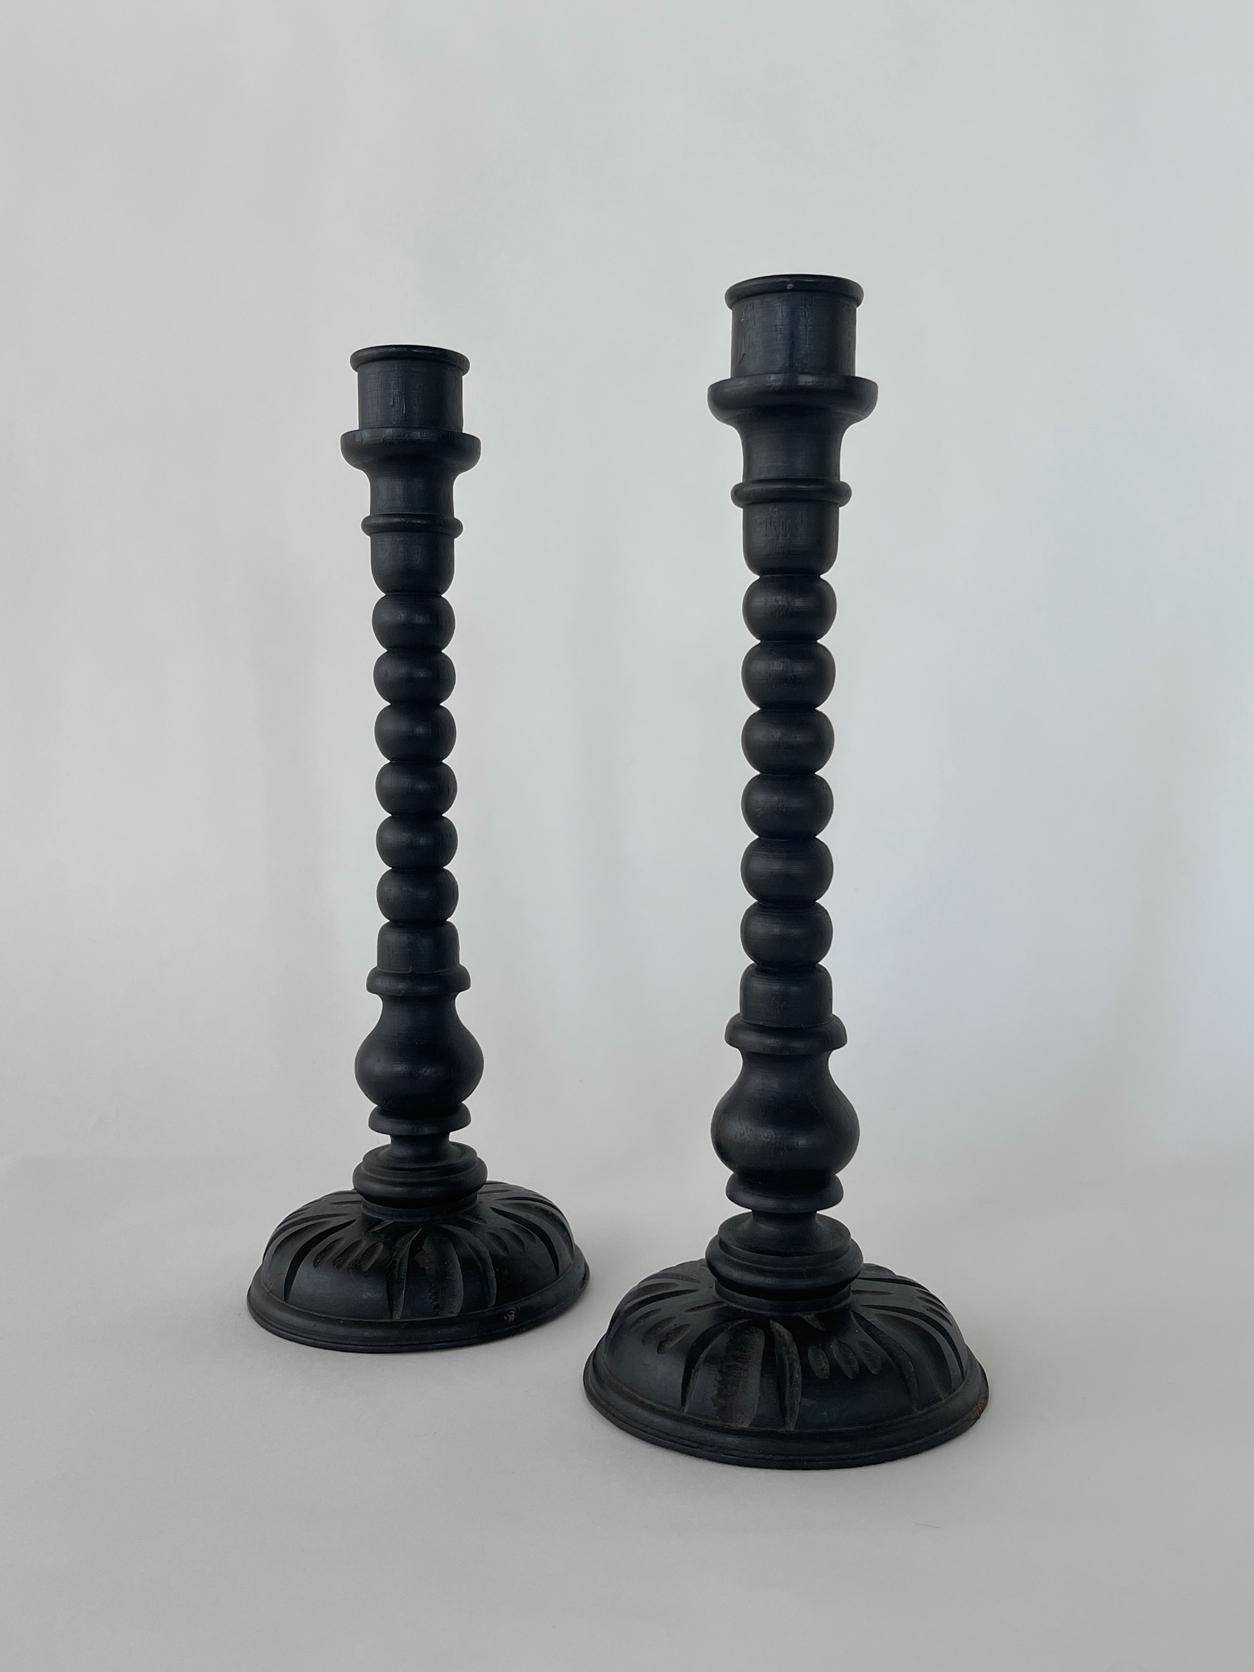 20th century Brutalist candle stick holders in a tall shape with a dark black paint. The set ready to be displayed in your home.